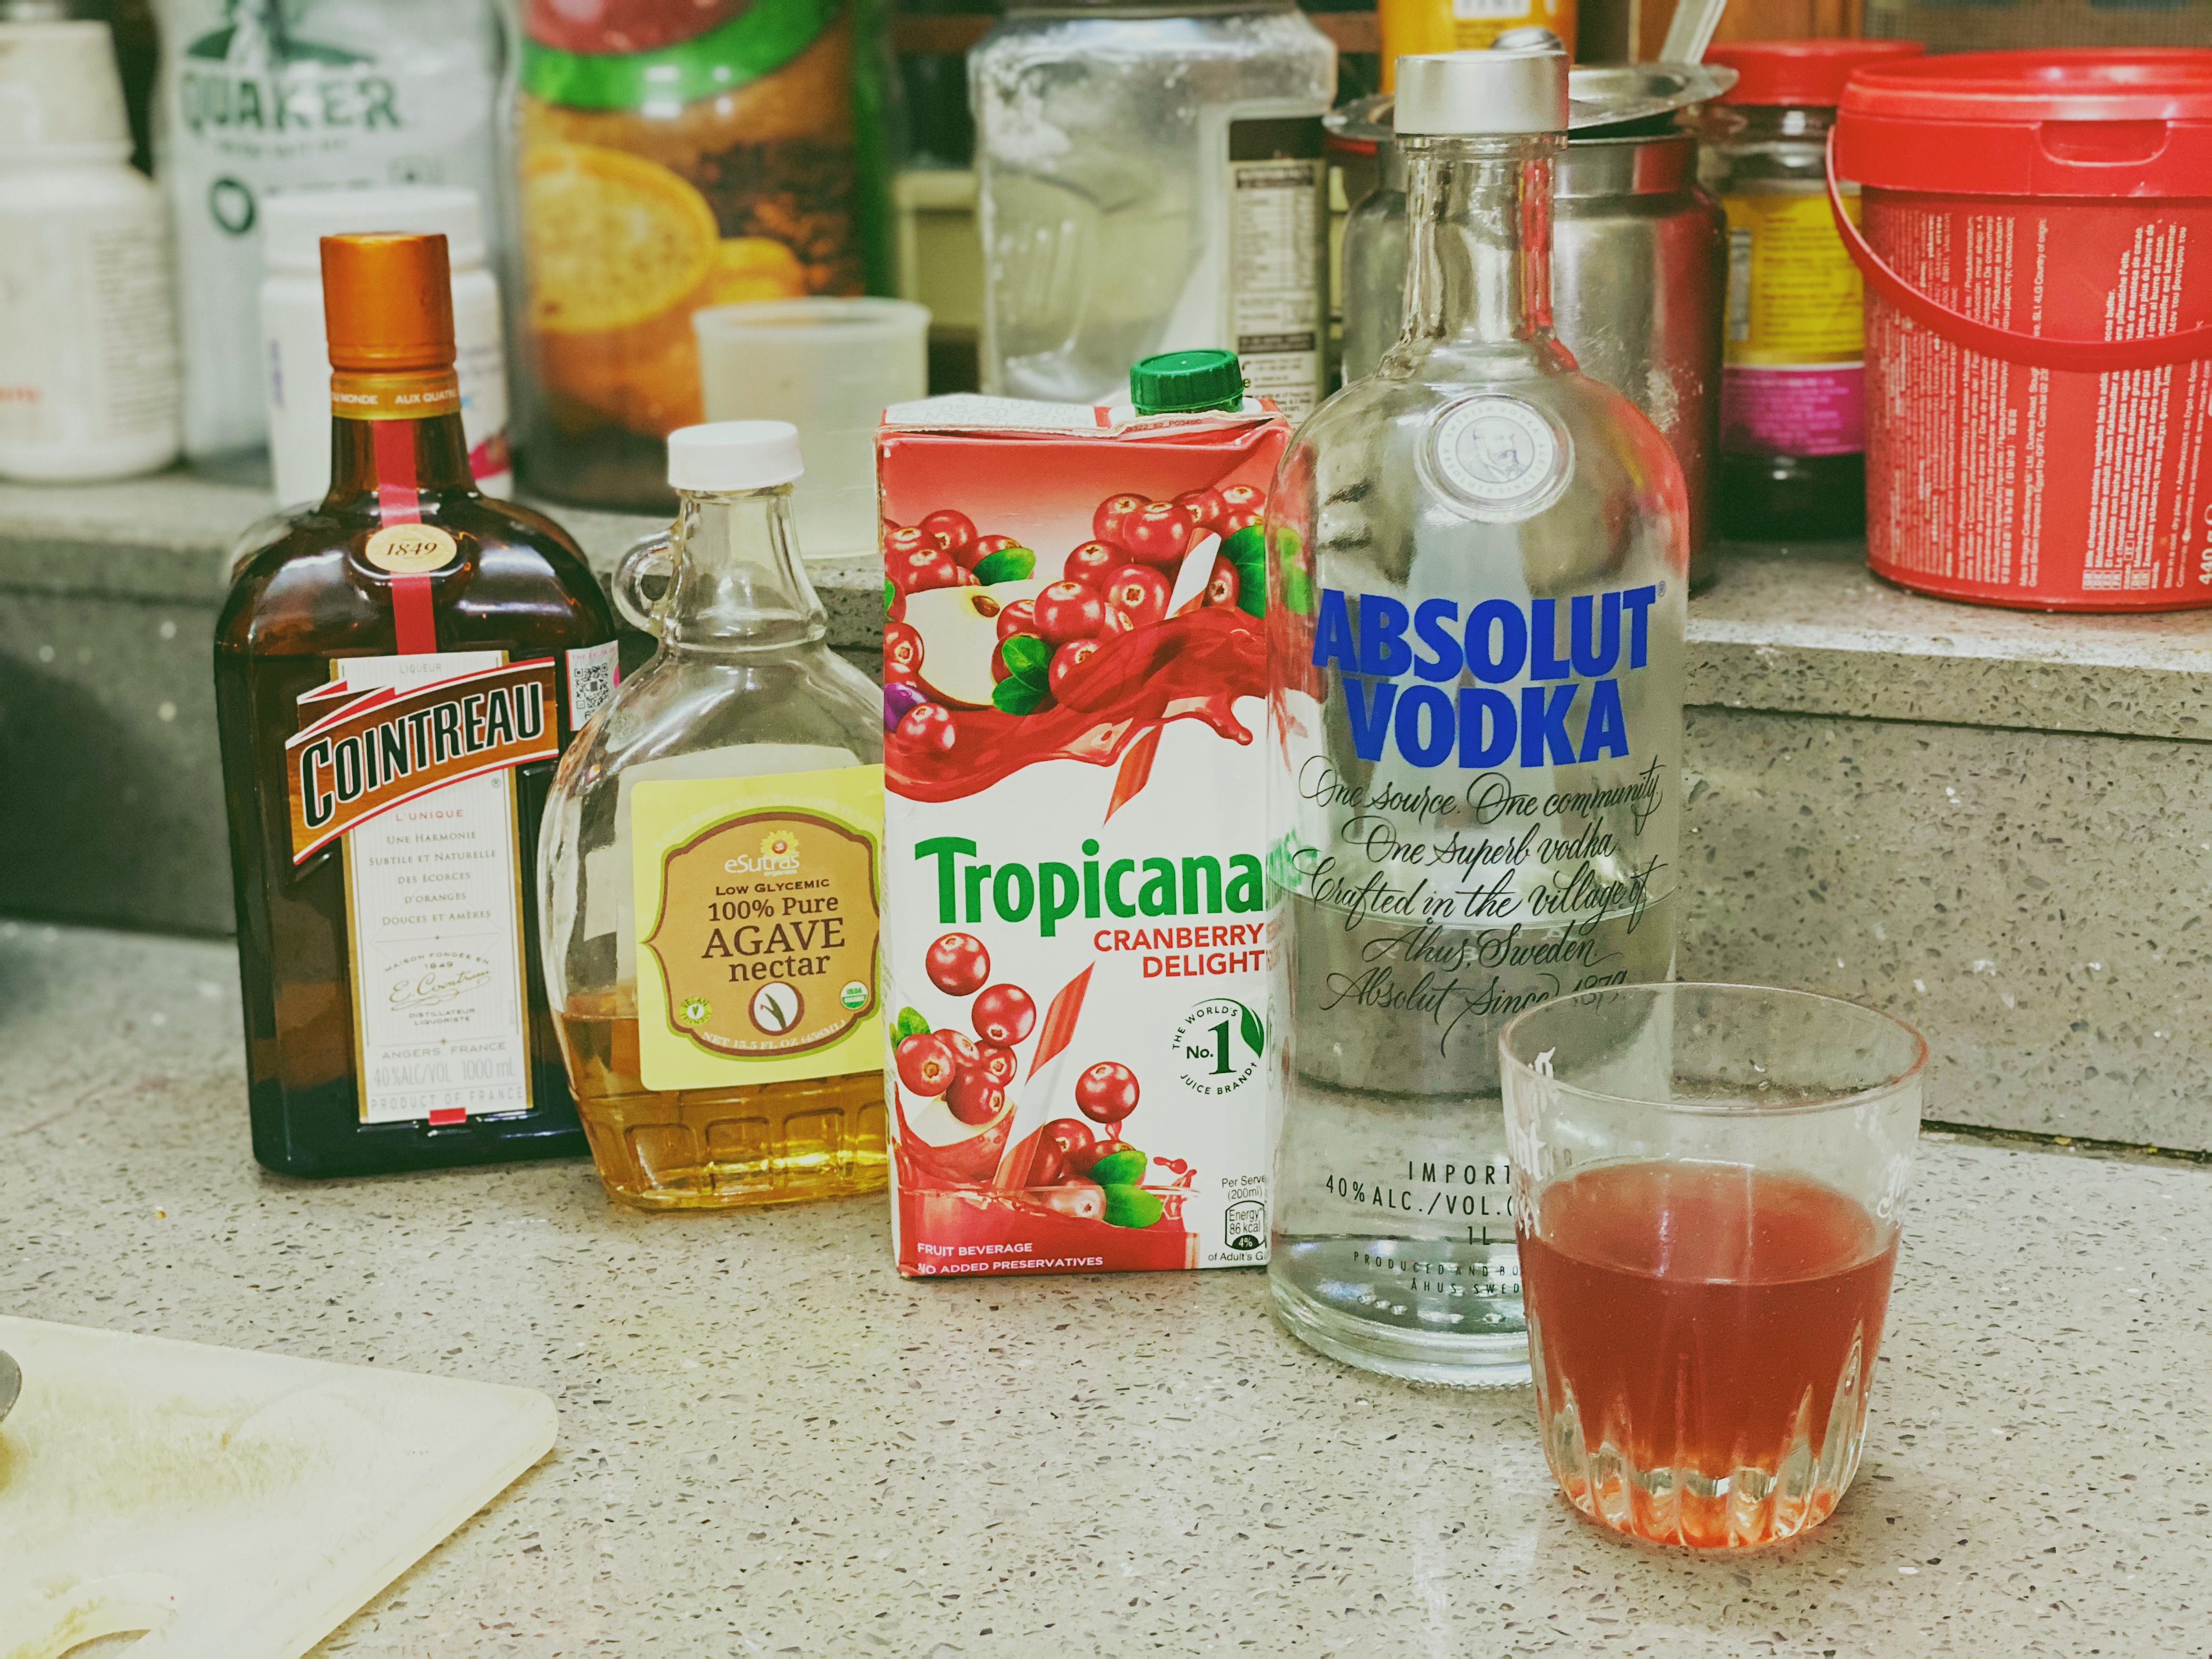 Ingredients for a Cosmopolitan